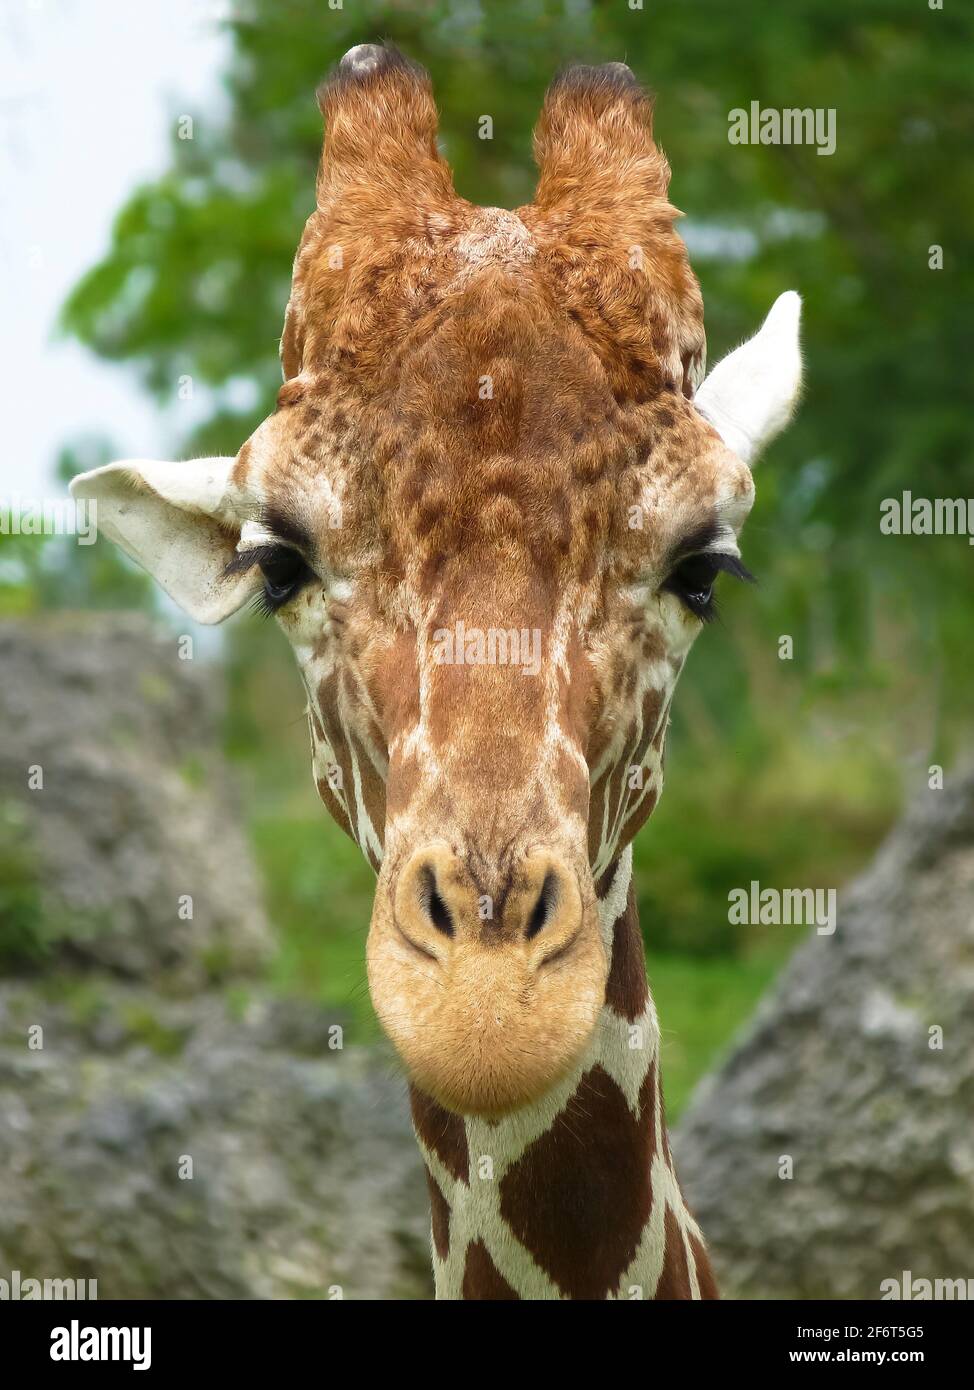 The giraffe is an African even-toed ungulate mammal, the tallest living terrestrial animal and the largest ruminant. It is traditionally considered Stock Photo